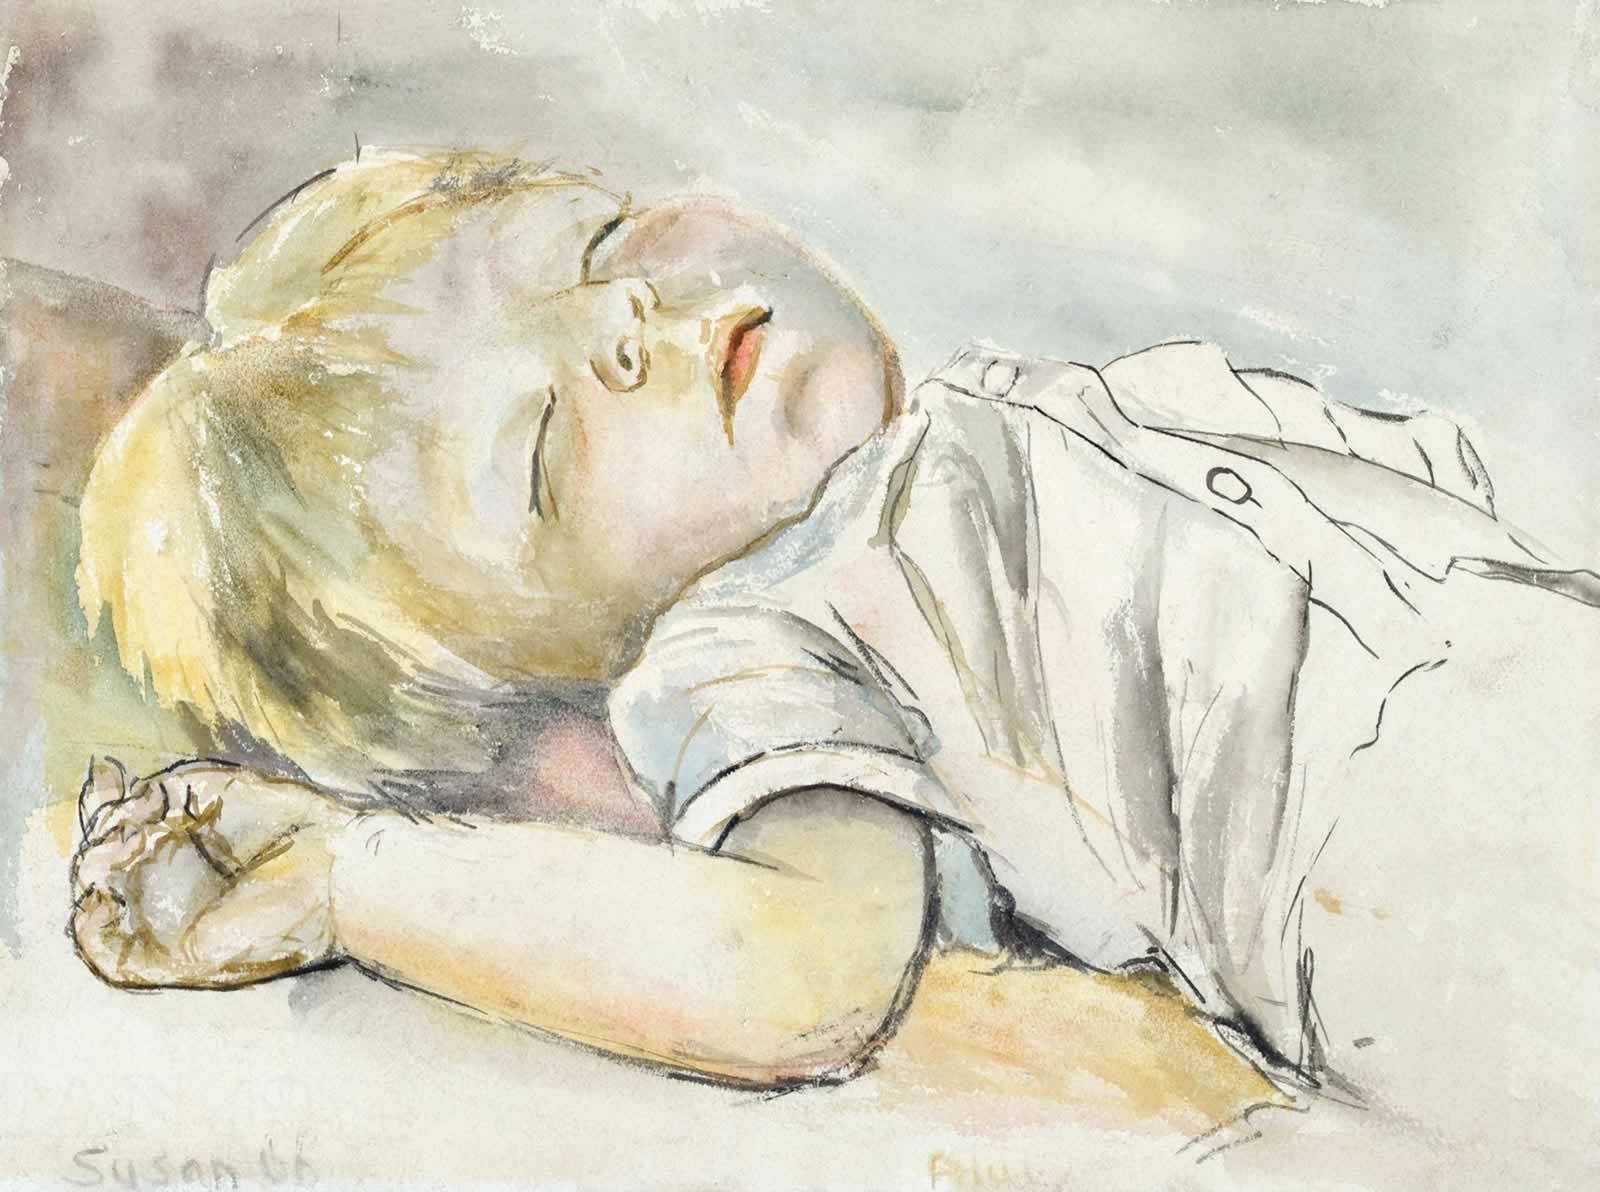 One-year-old Paul, Sleeping by Susan Dorothea White